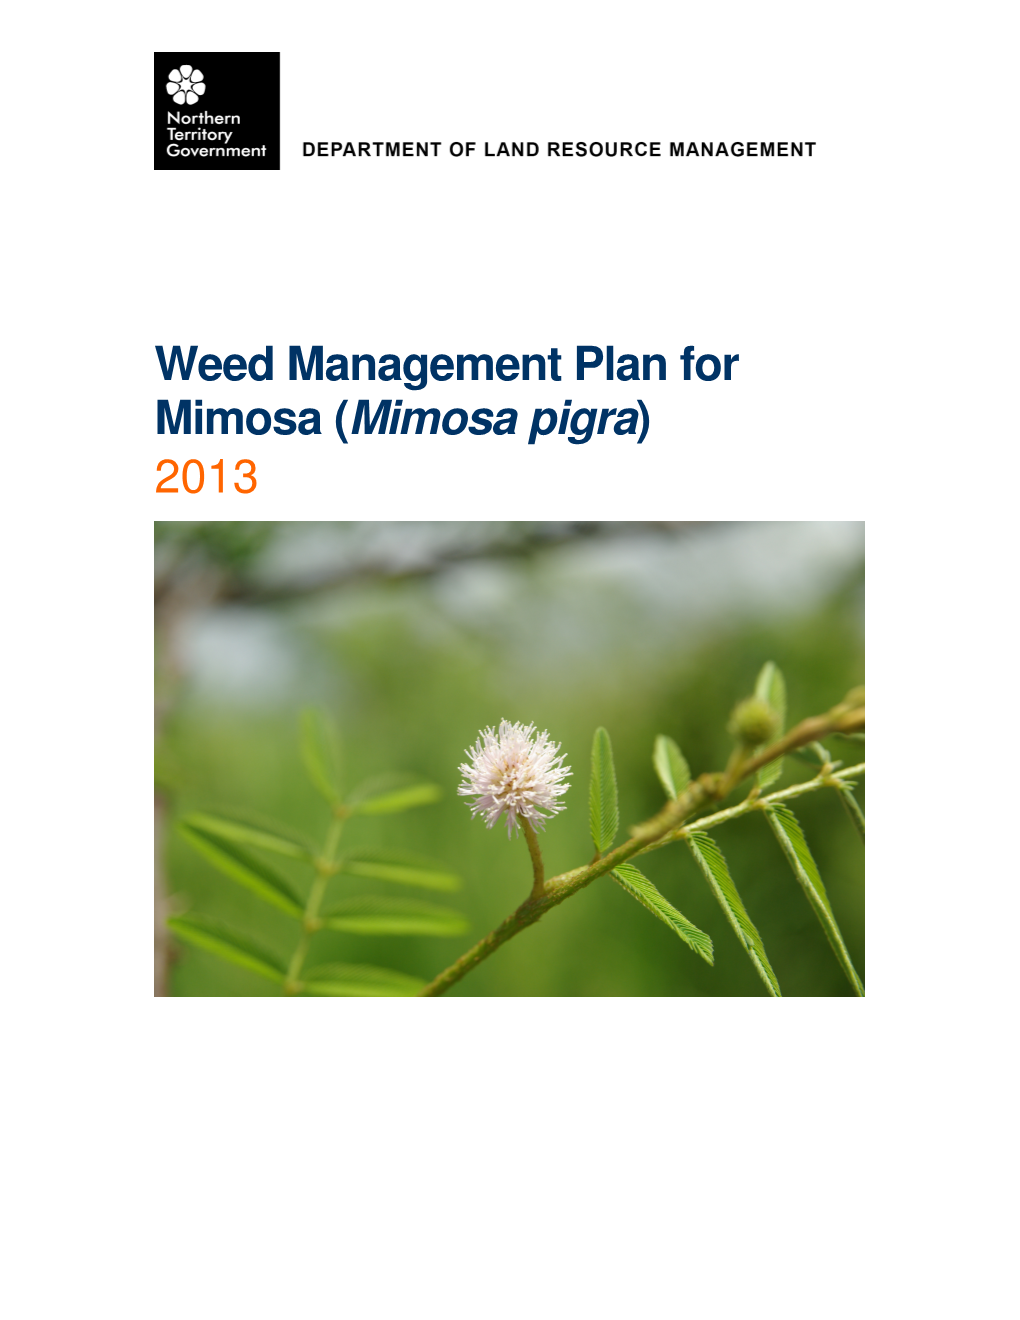 Weed Management Plan for Mimosa ( Mimosa Pigra ) 2013